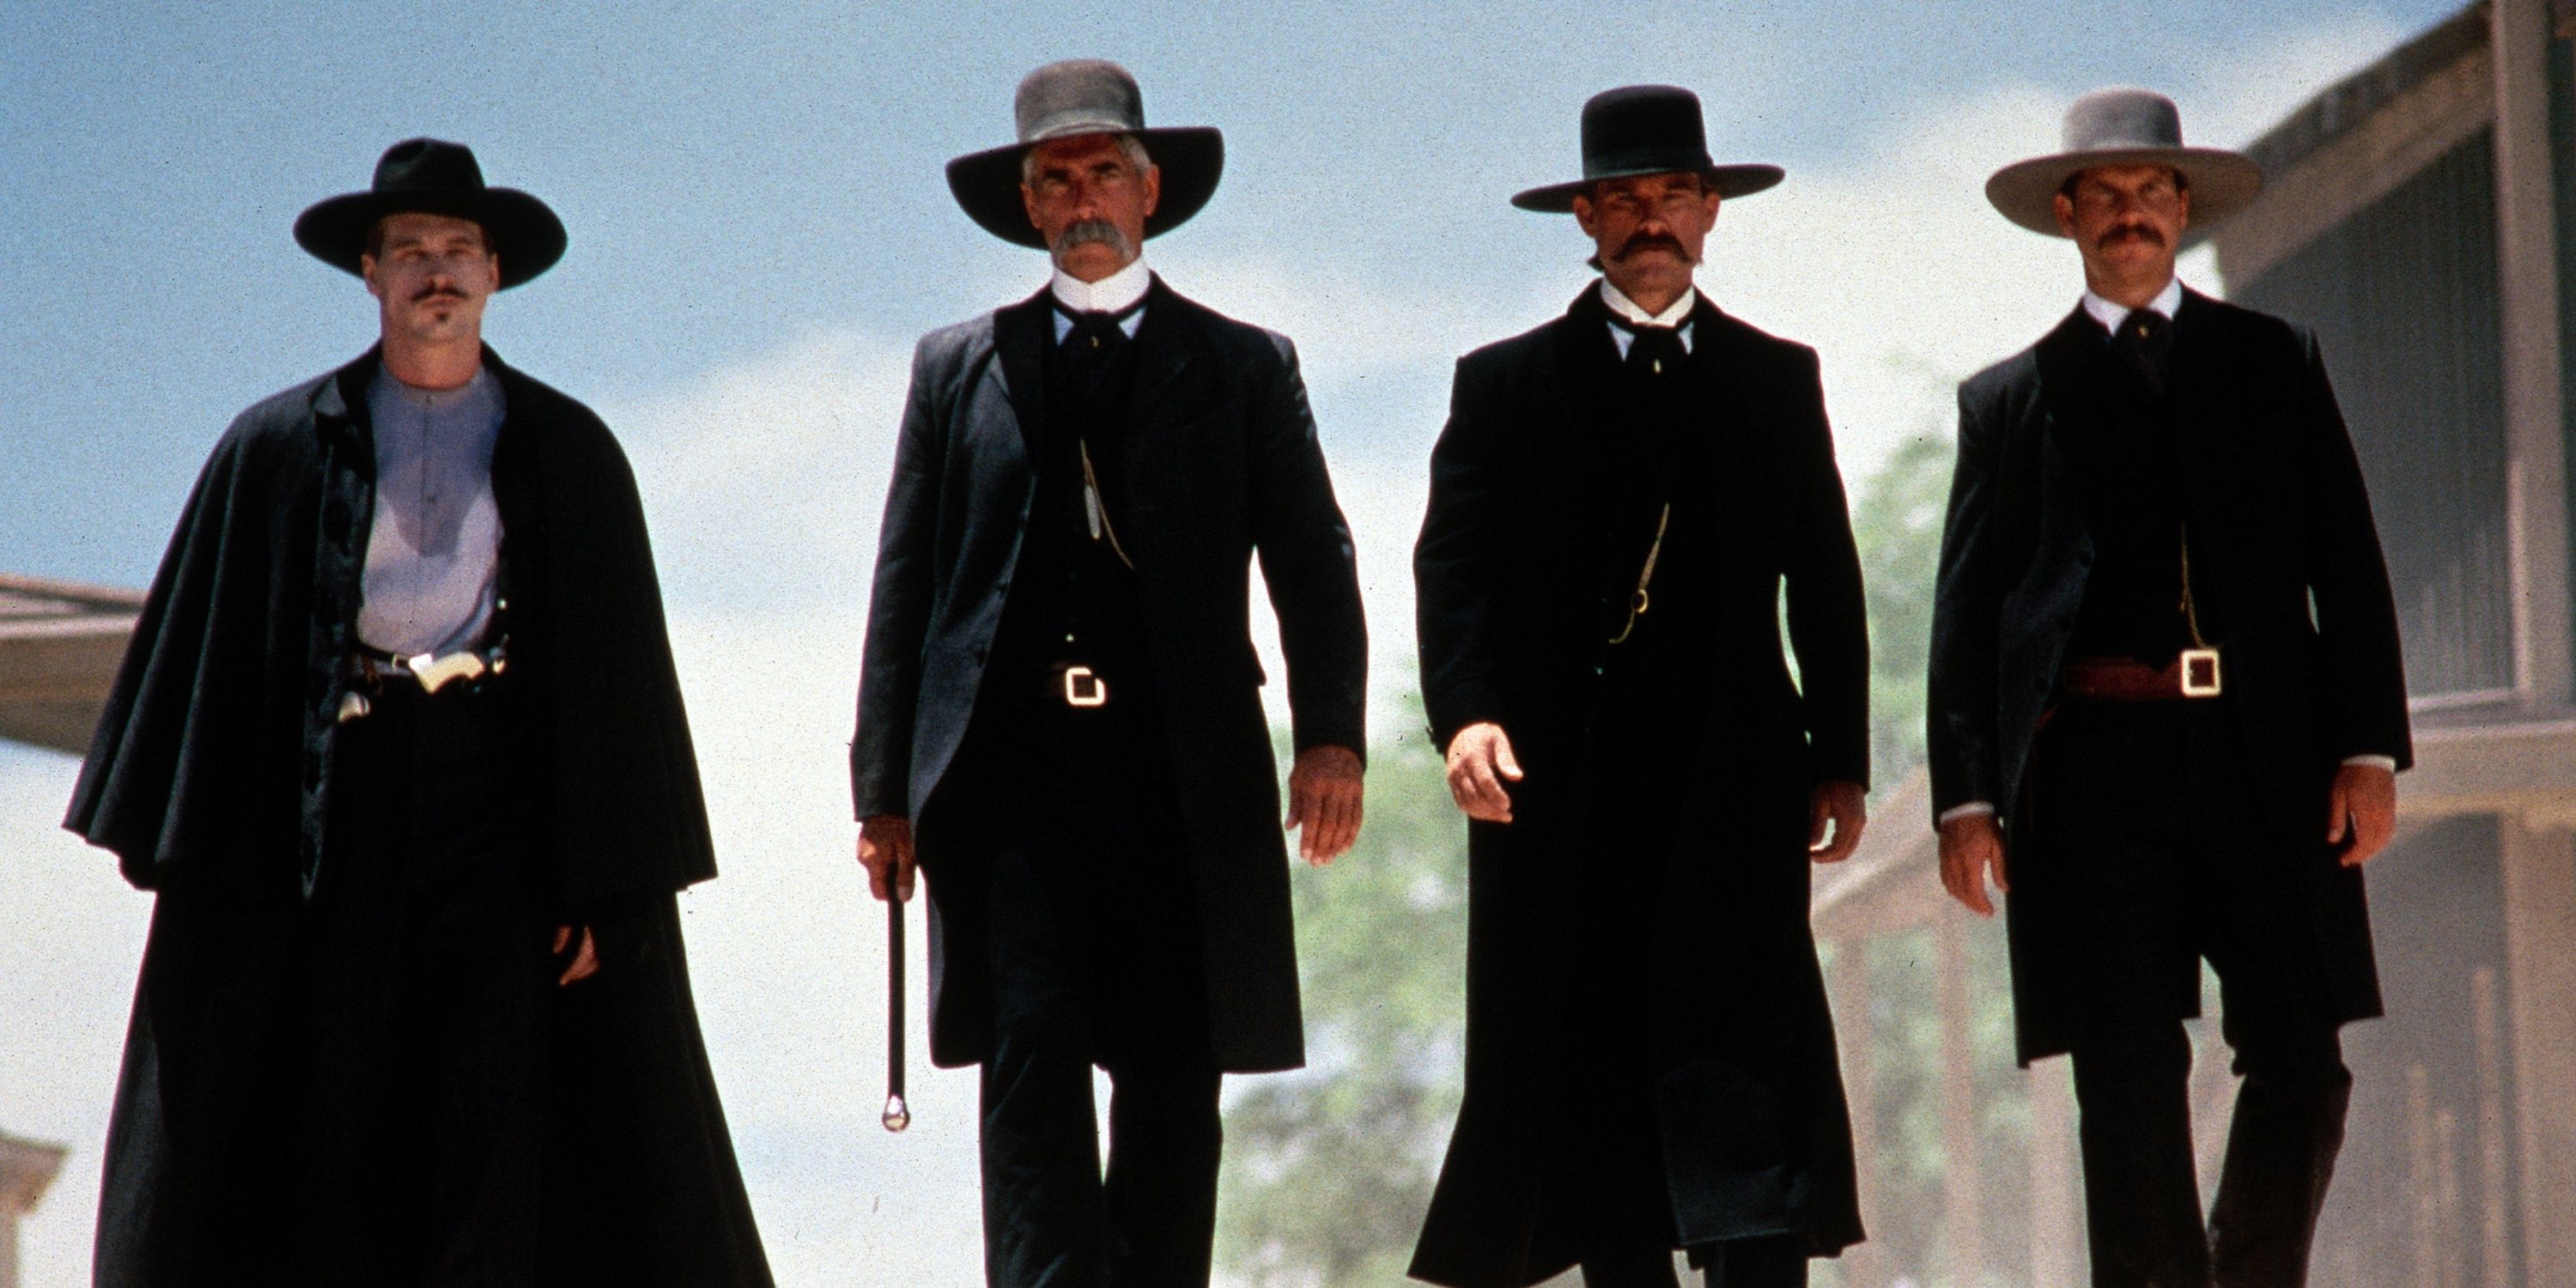 four cowboys dressed in black walking through deserted town